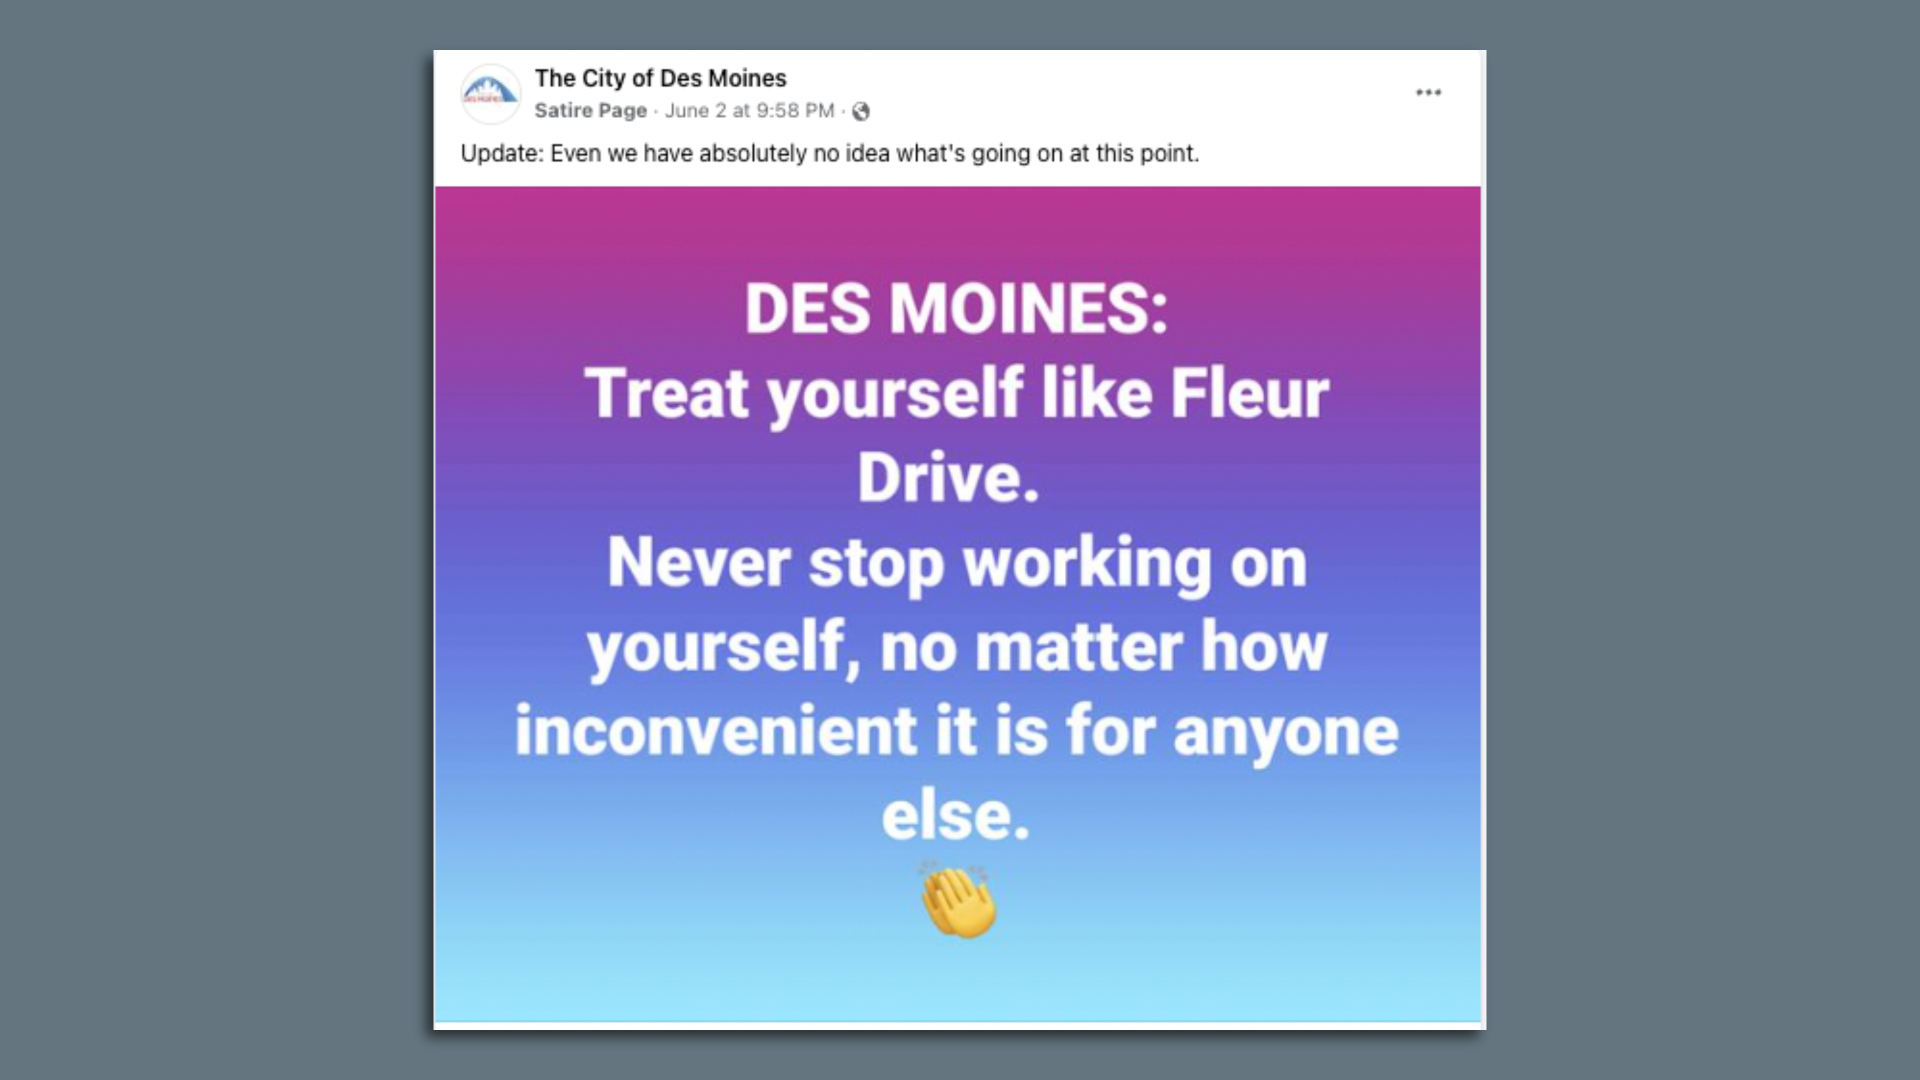 A spoof of the city of Des Moines' Facebook page.